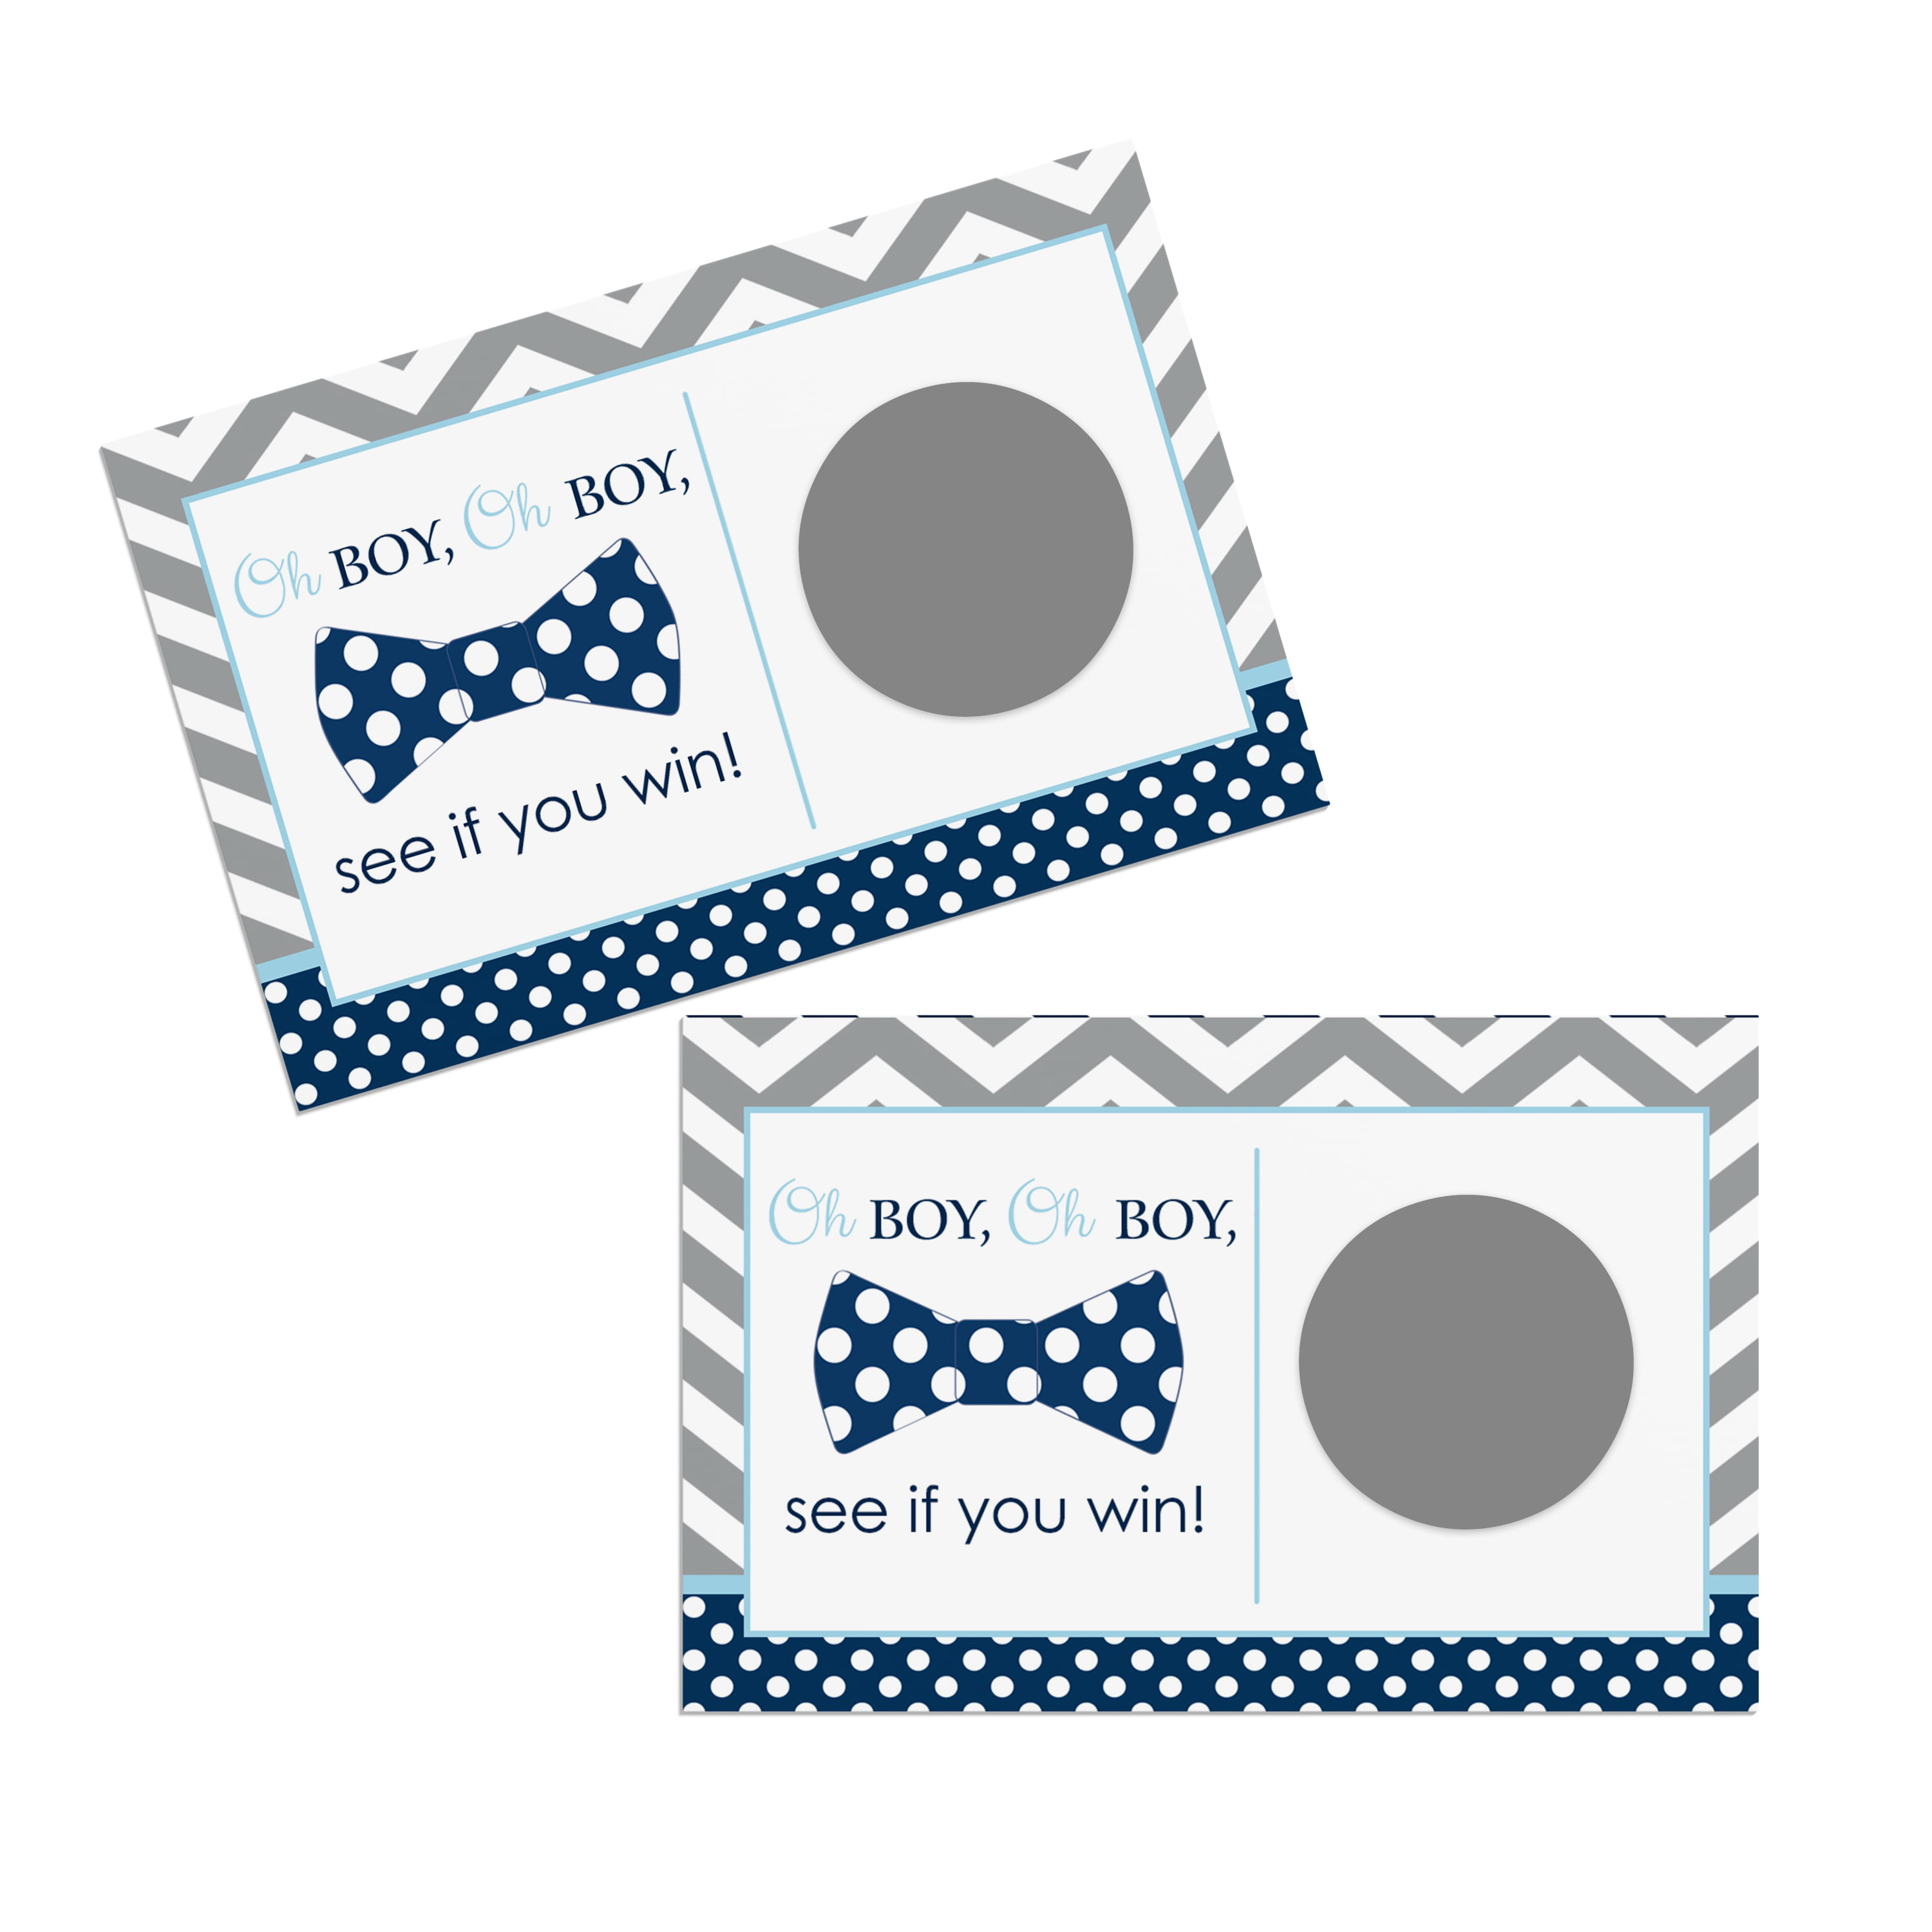 UNIQUE PERSONALIZED RUBBER DUCK THEME BABY SHOWER SCRATCH OFF LOTTO GAME CARDS 